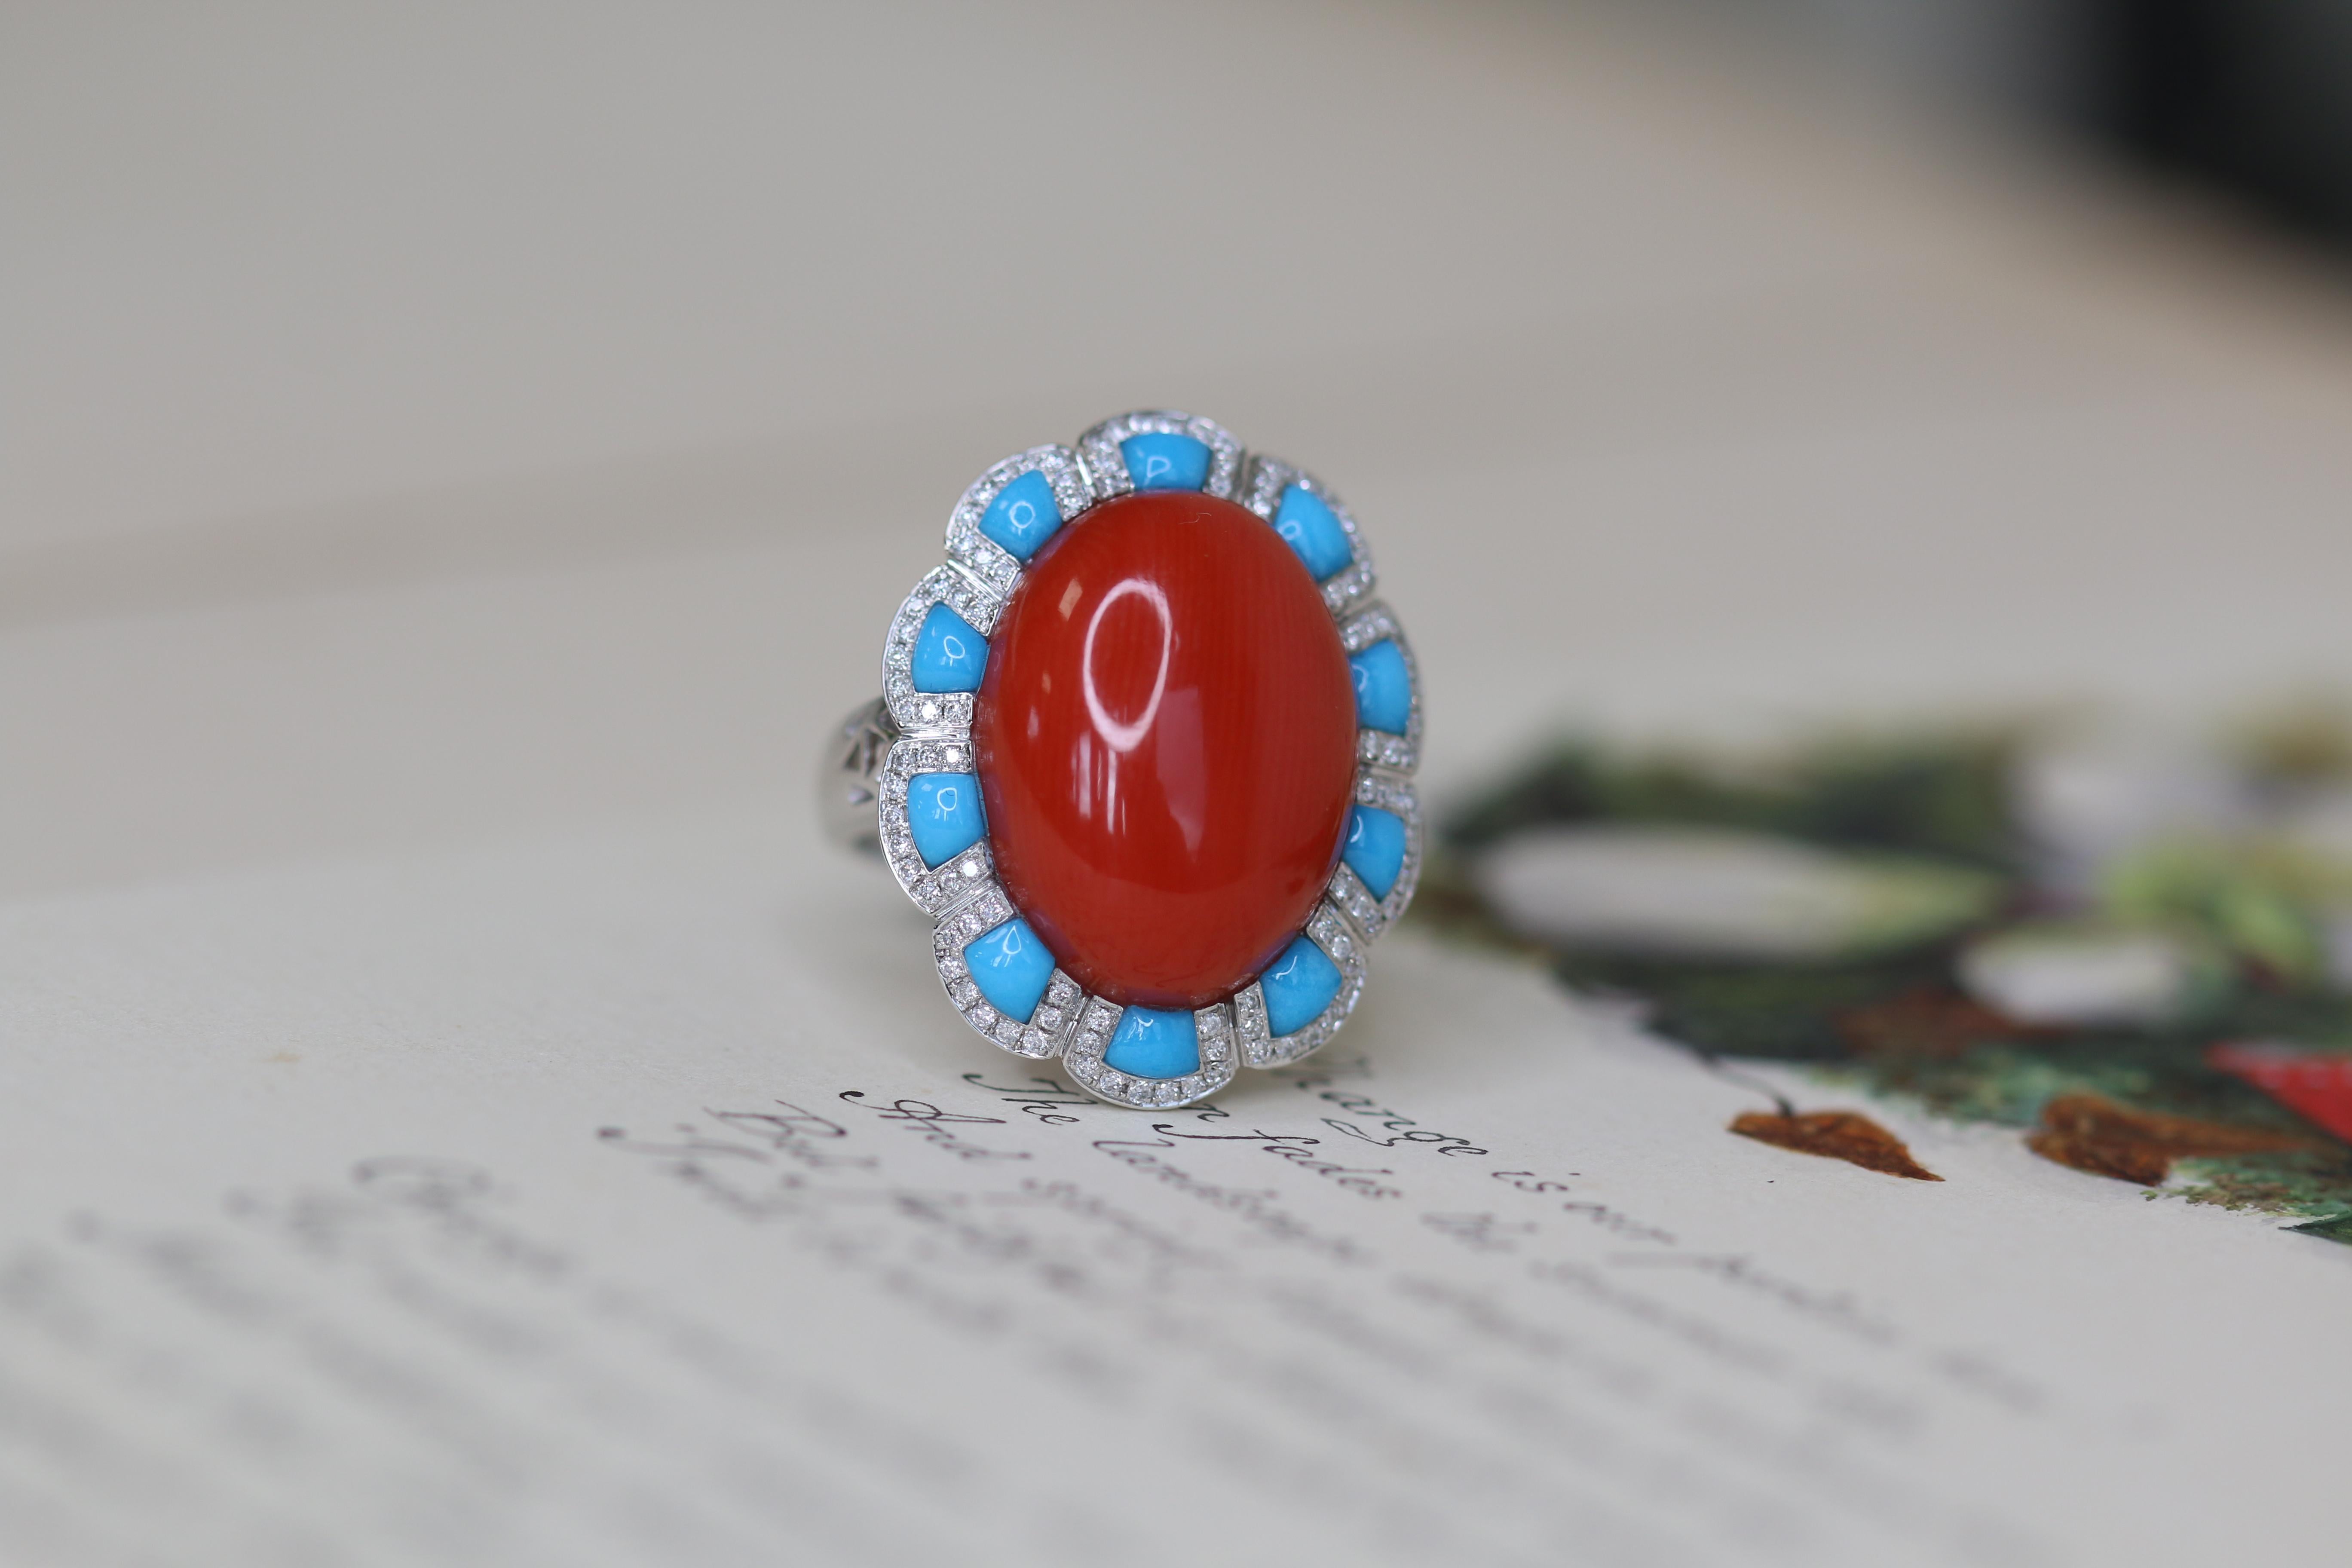 This beautiful coral ring has the classic combination of red, white and blue; coral, diamond and turquoise. These are arranged into a strikingly beautiful cocktail style ring. The flawless, natural deep red coral sits at the centre of the design.